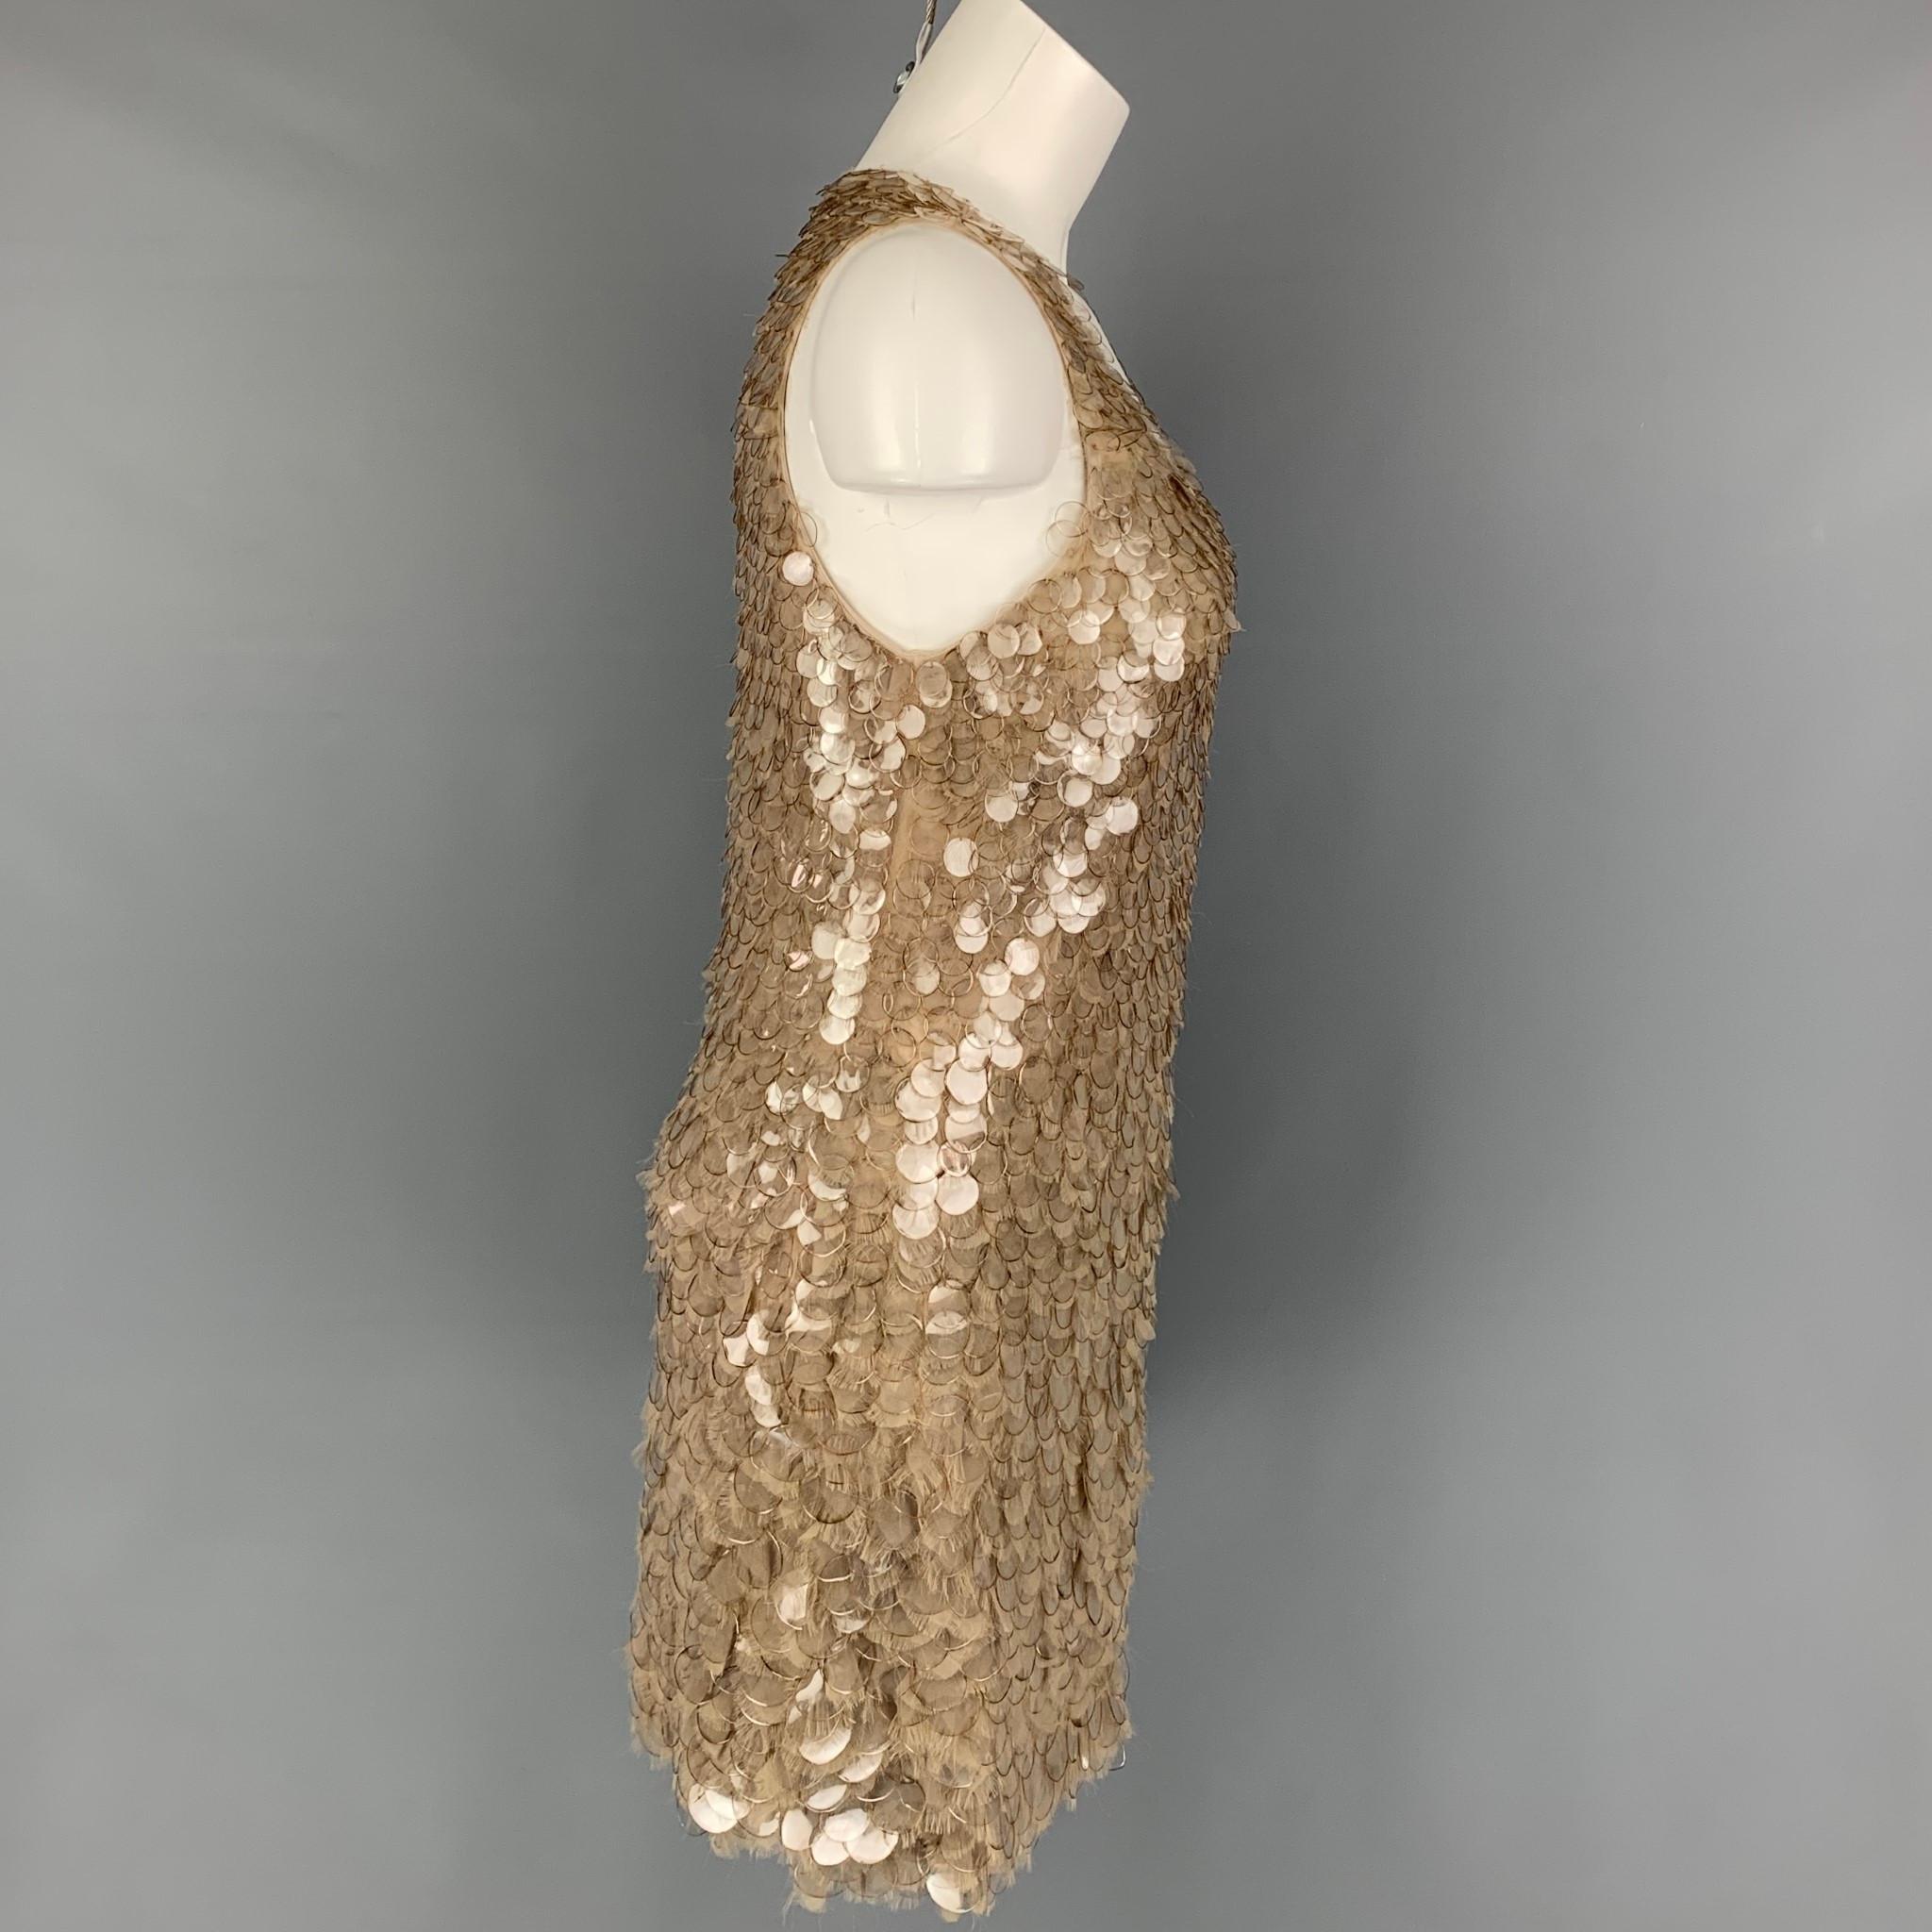 J. MENDEL dress comes in a taupe polyamide / silk with a pailette sequined design throughout featuring a shift style, sleeveless, and a side zipper closure. Made in USA. 

Very Good Pre-Owned Condition.
Marked: 8

Measurements:

Shoulder: 11.5